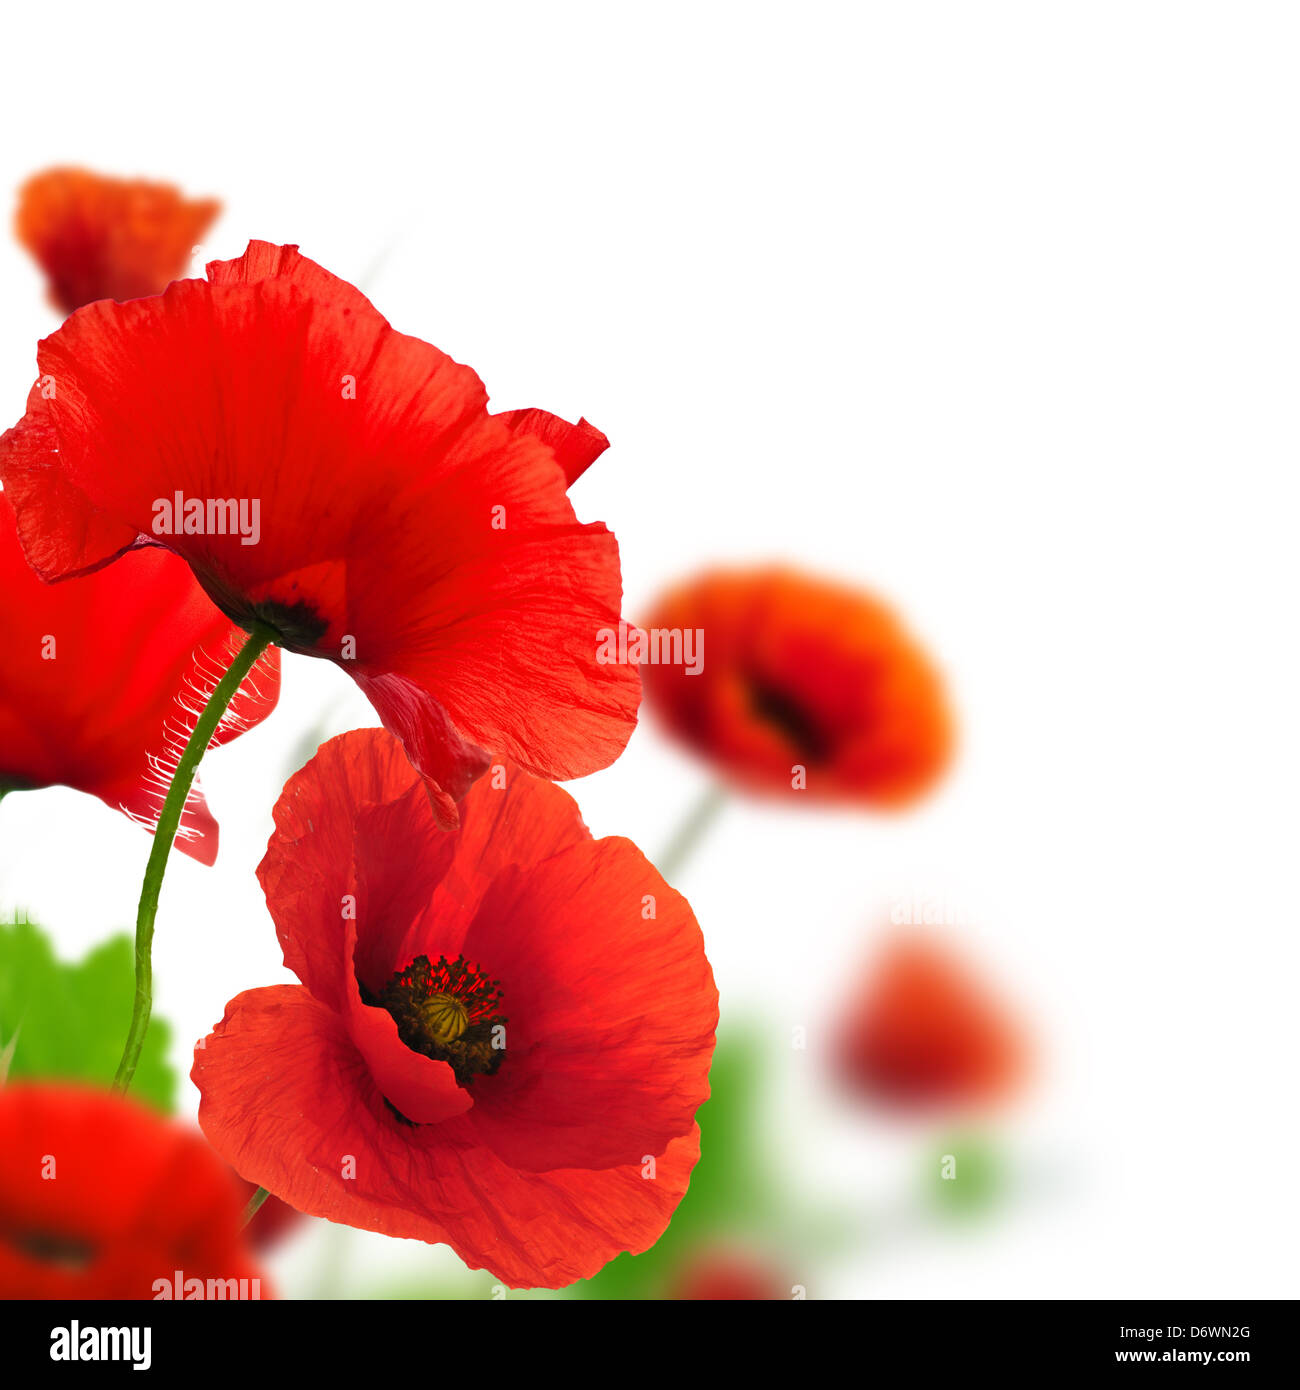 red poppies over white background Stock Photo